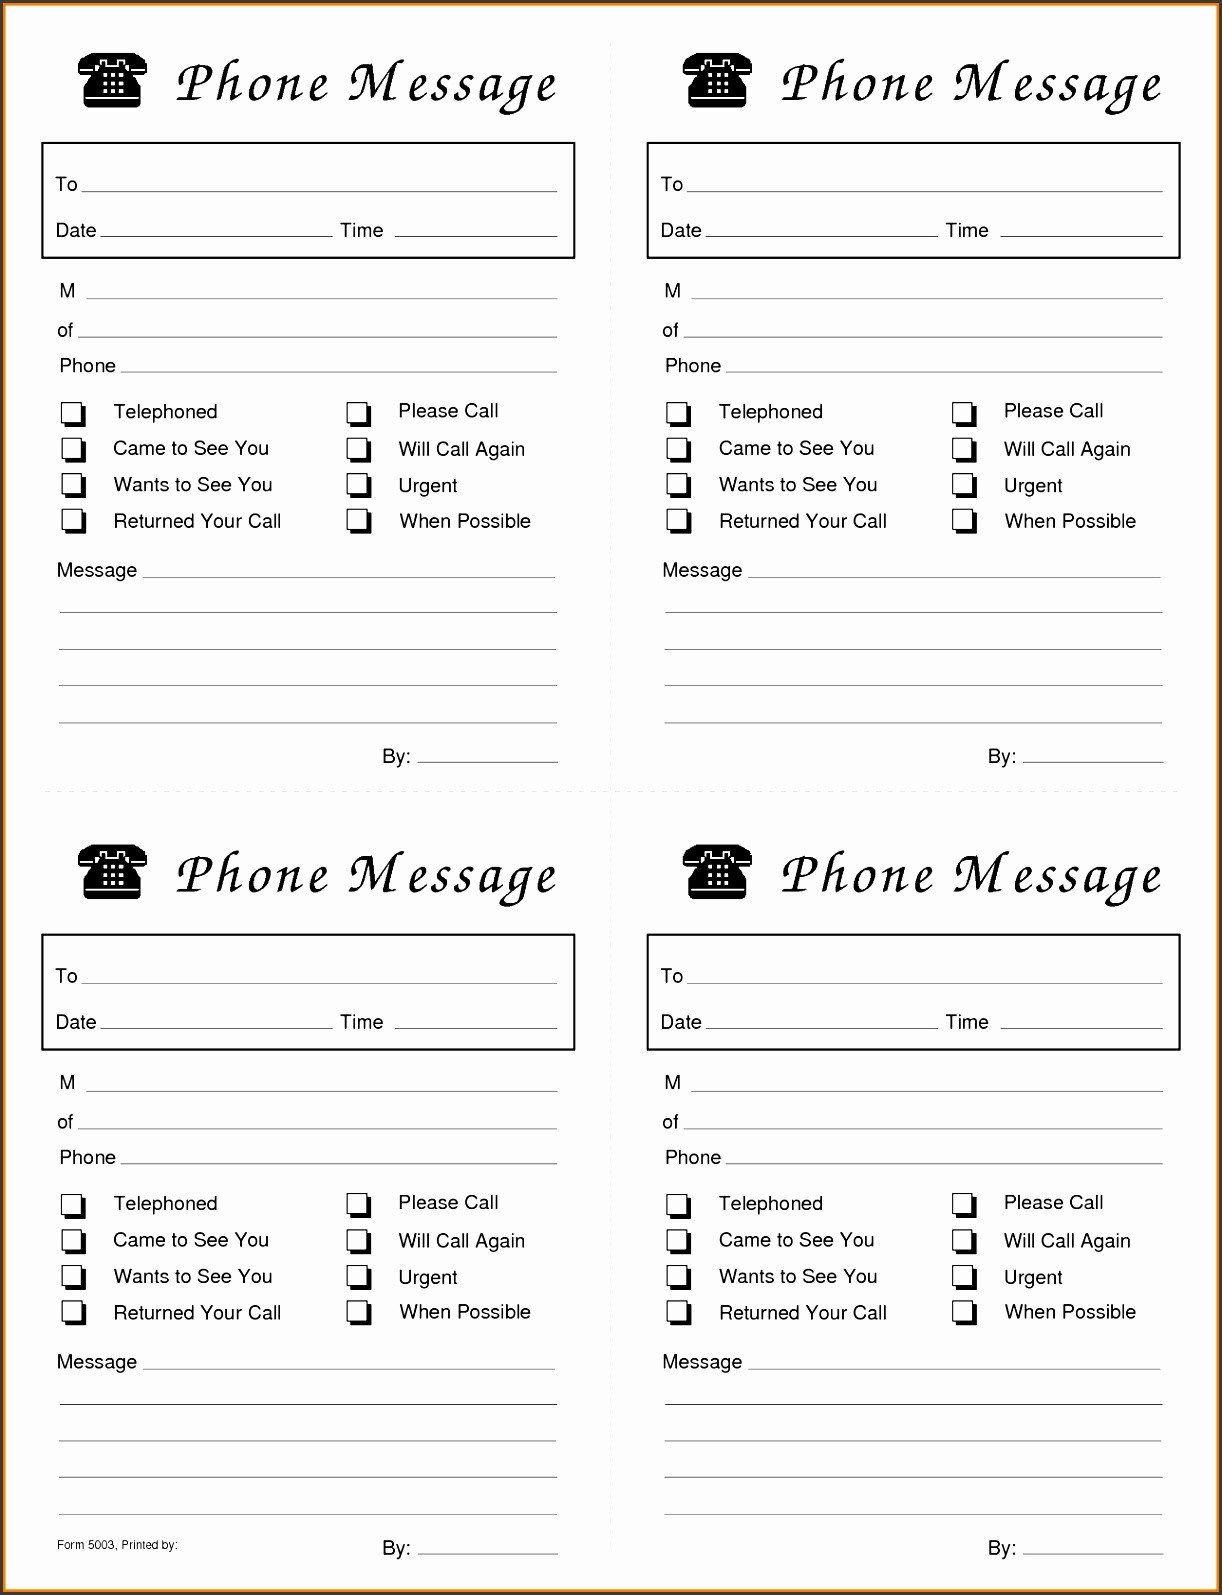 9 Telephone Message Template for panies